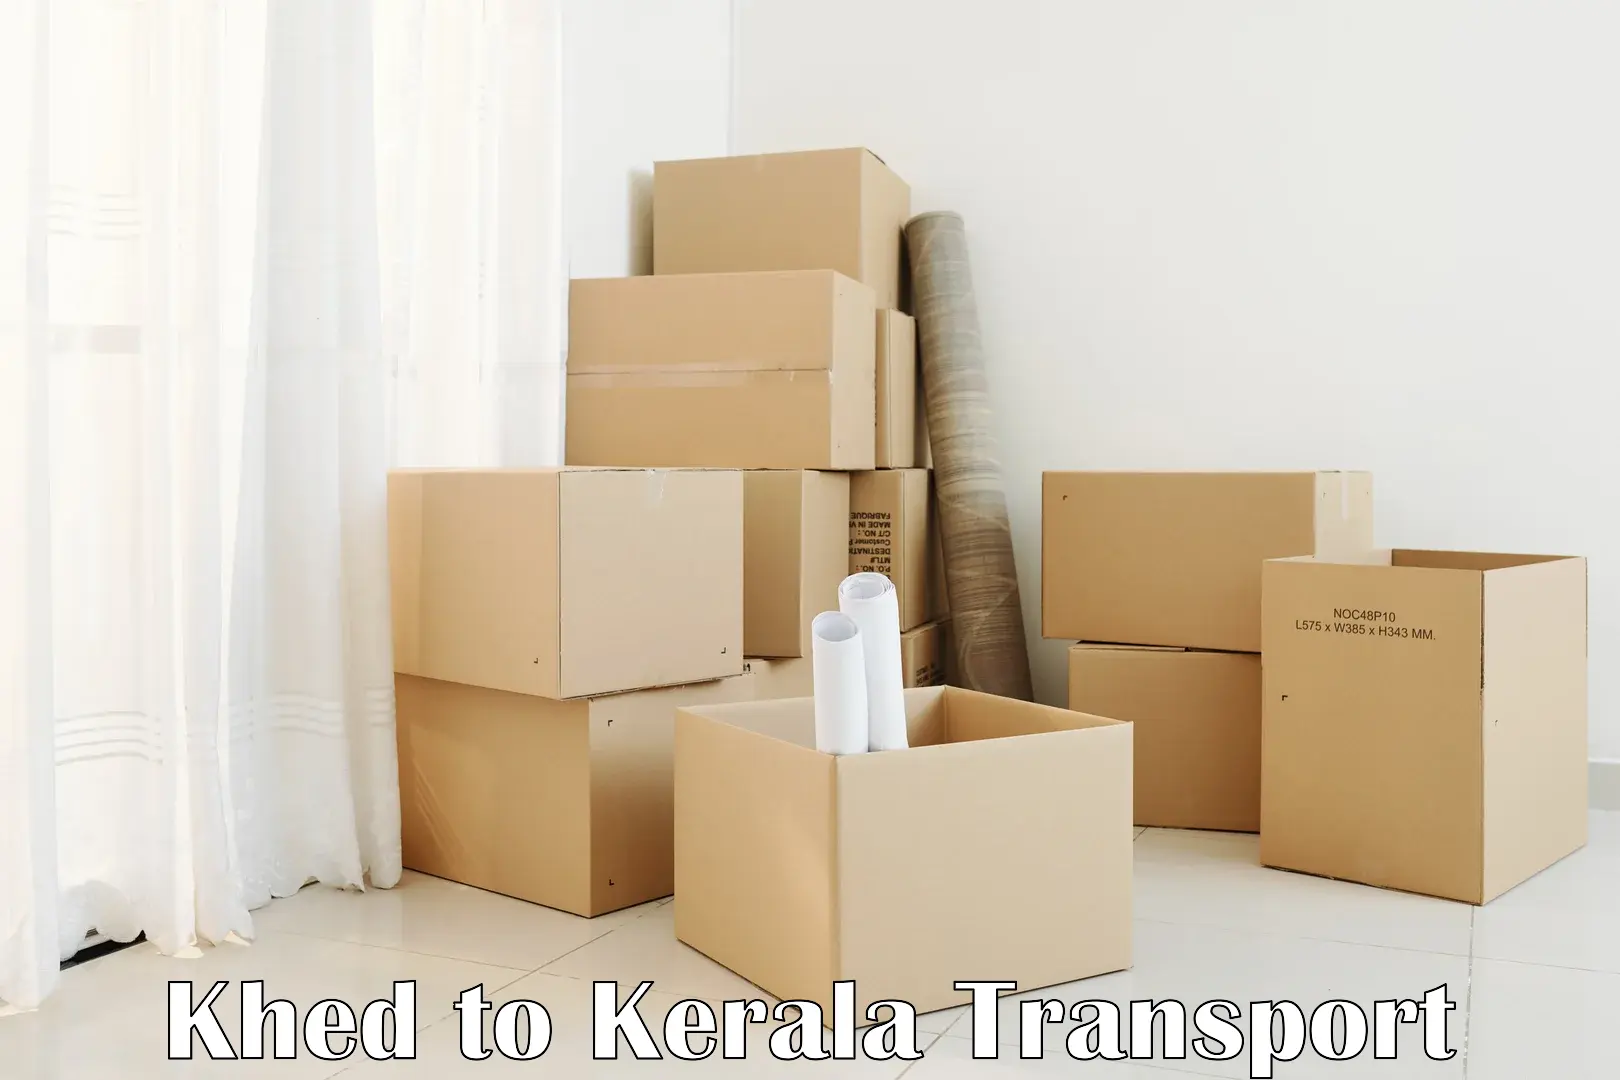 Delivery service Khed to Kattappana